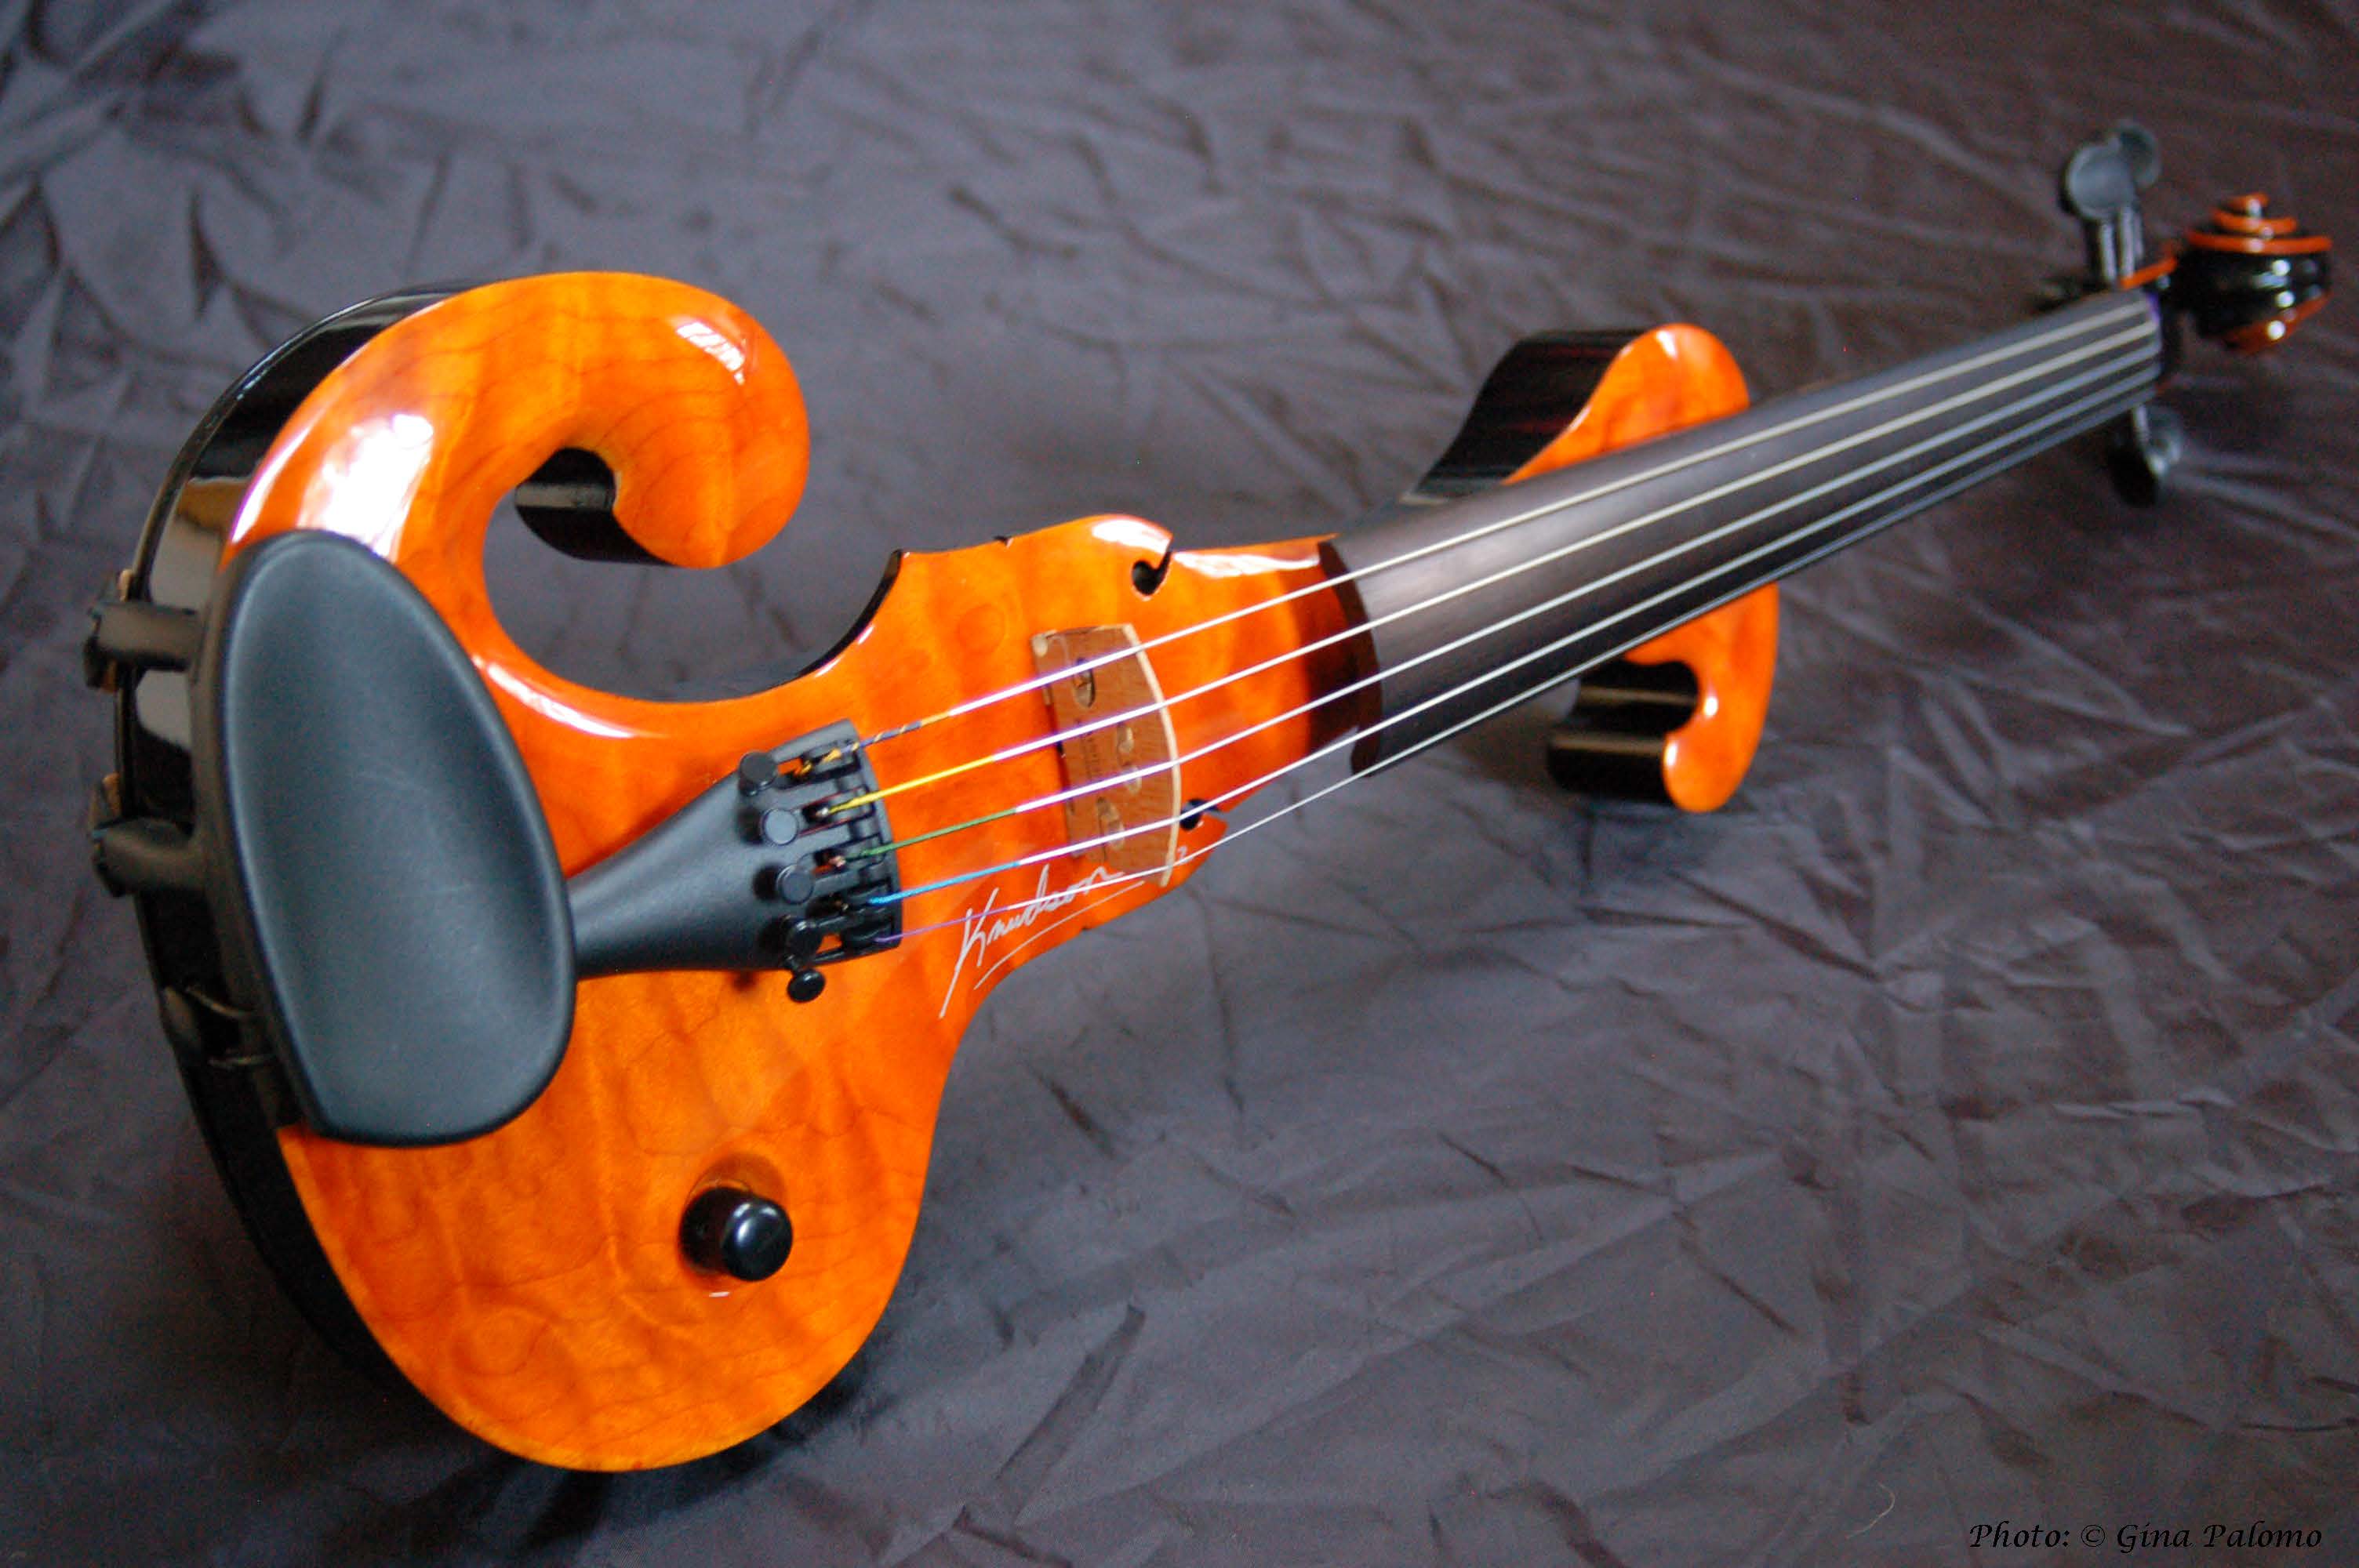 Growth in the Market of Electric Violins